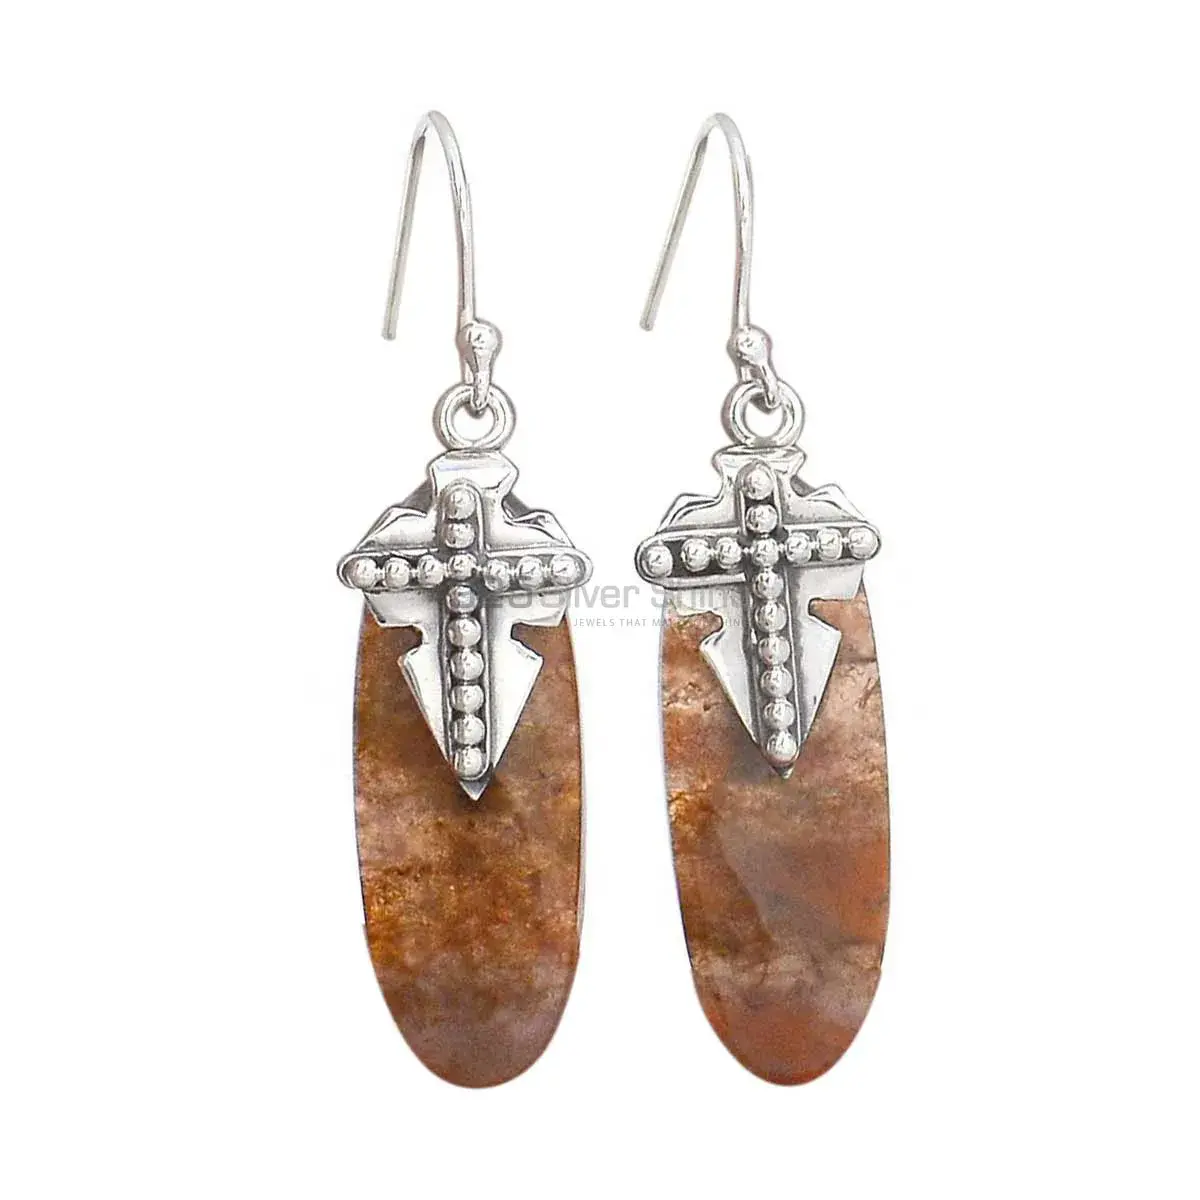 Top Quality 925 Sterling Silver Handmade Earrings In Cacoxenite Gemstone Jewelry 925SE2617